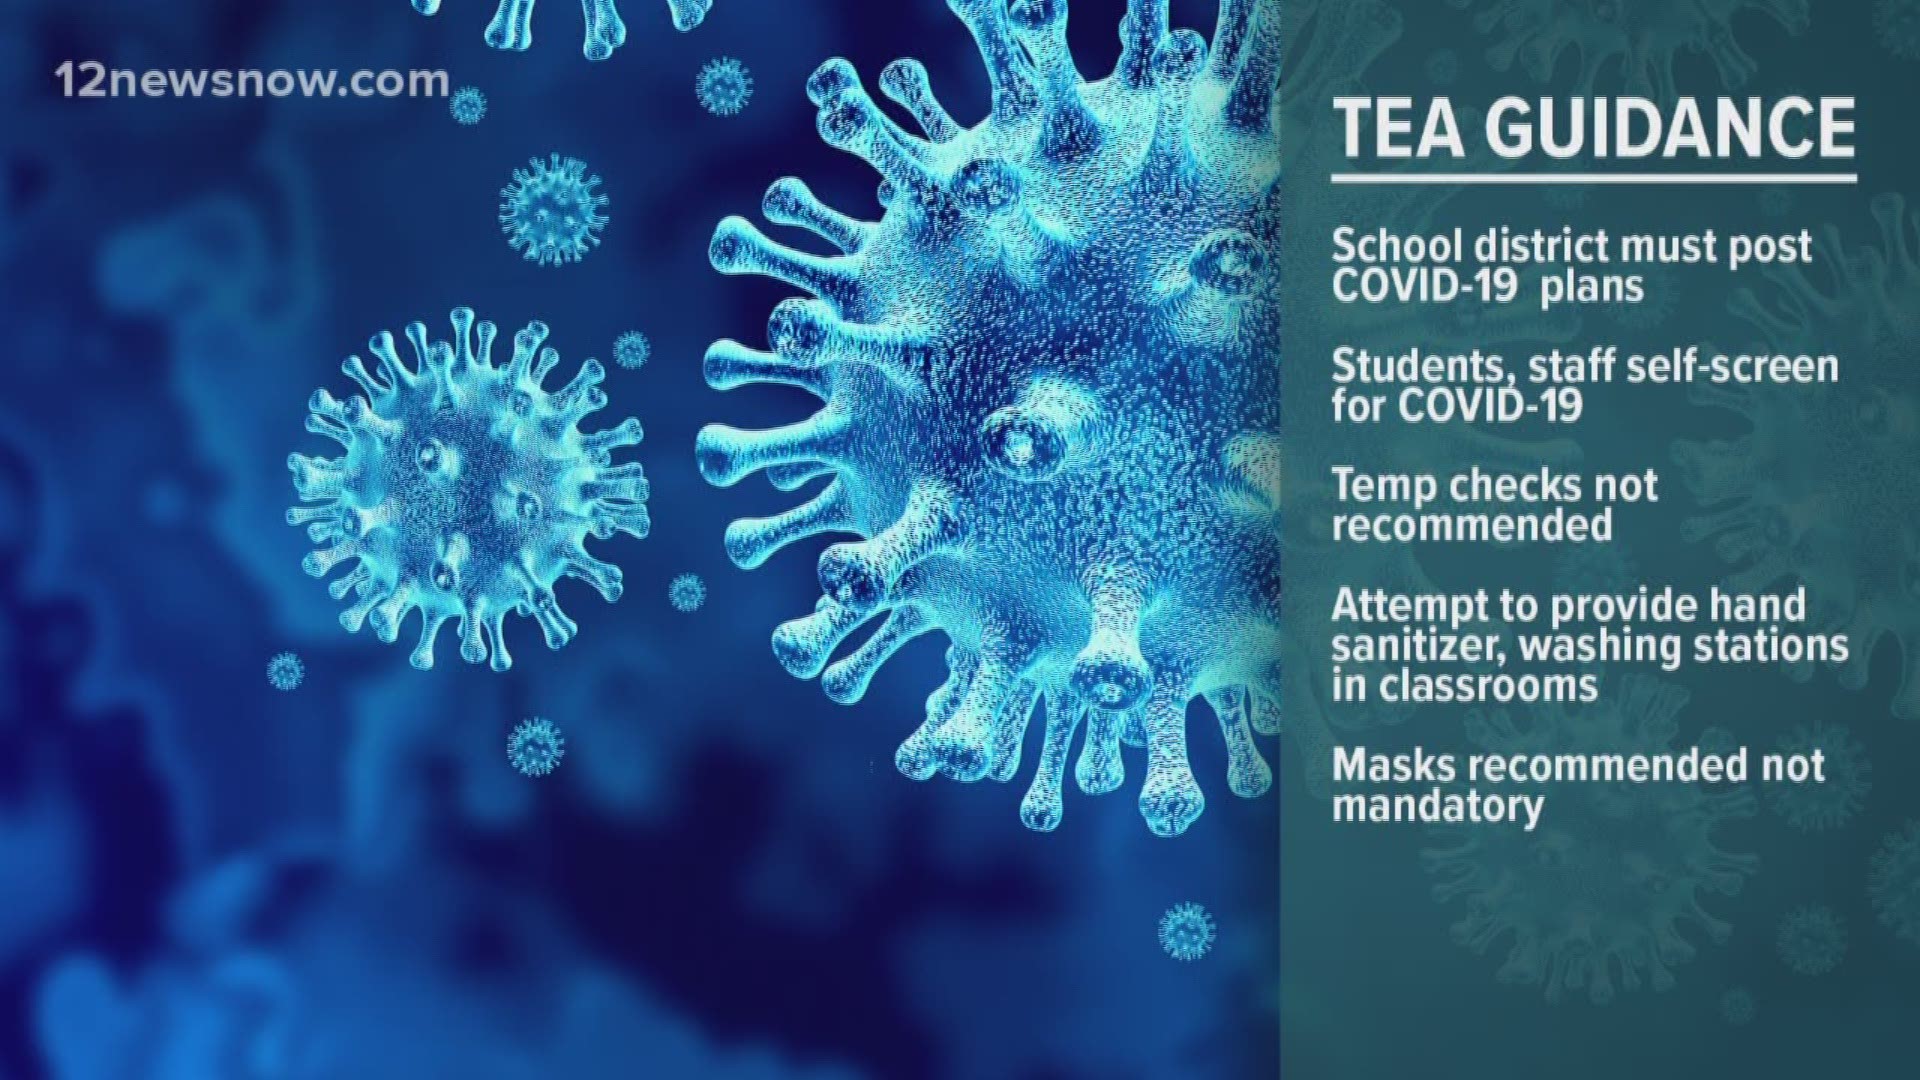 A draft document found on the TEA's website Tuesday showed agency officials are envisioning a largely hands-off approach to the start of school this fall.